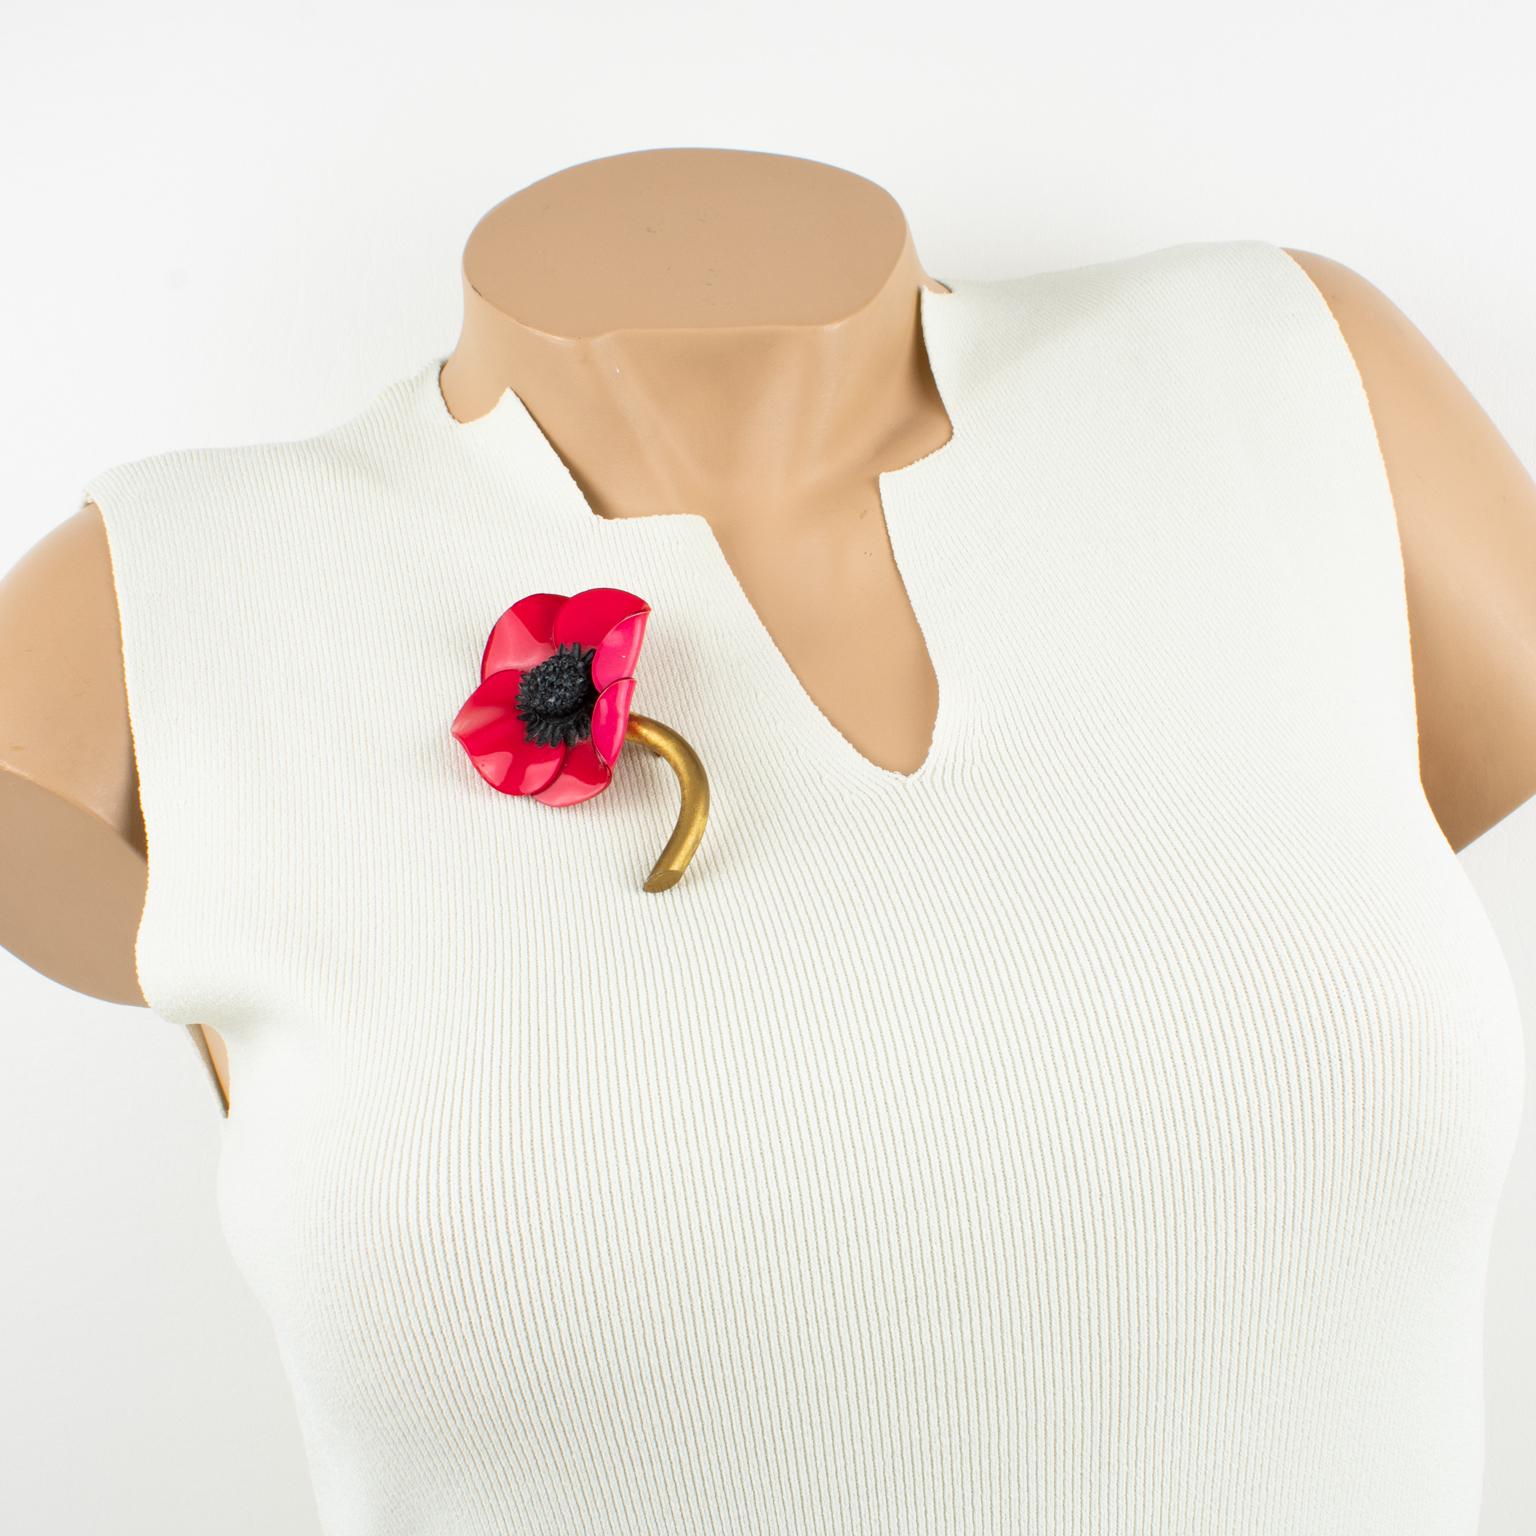 Charming dimensional pin brooch designed by Cilea Paris for French Jewelry designer Francoise Montague. Floral-inspired hand-made artisanal resin brooch featuring poppy flowers with textured patterns build together to form a powerful statement